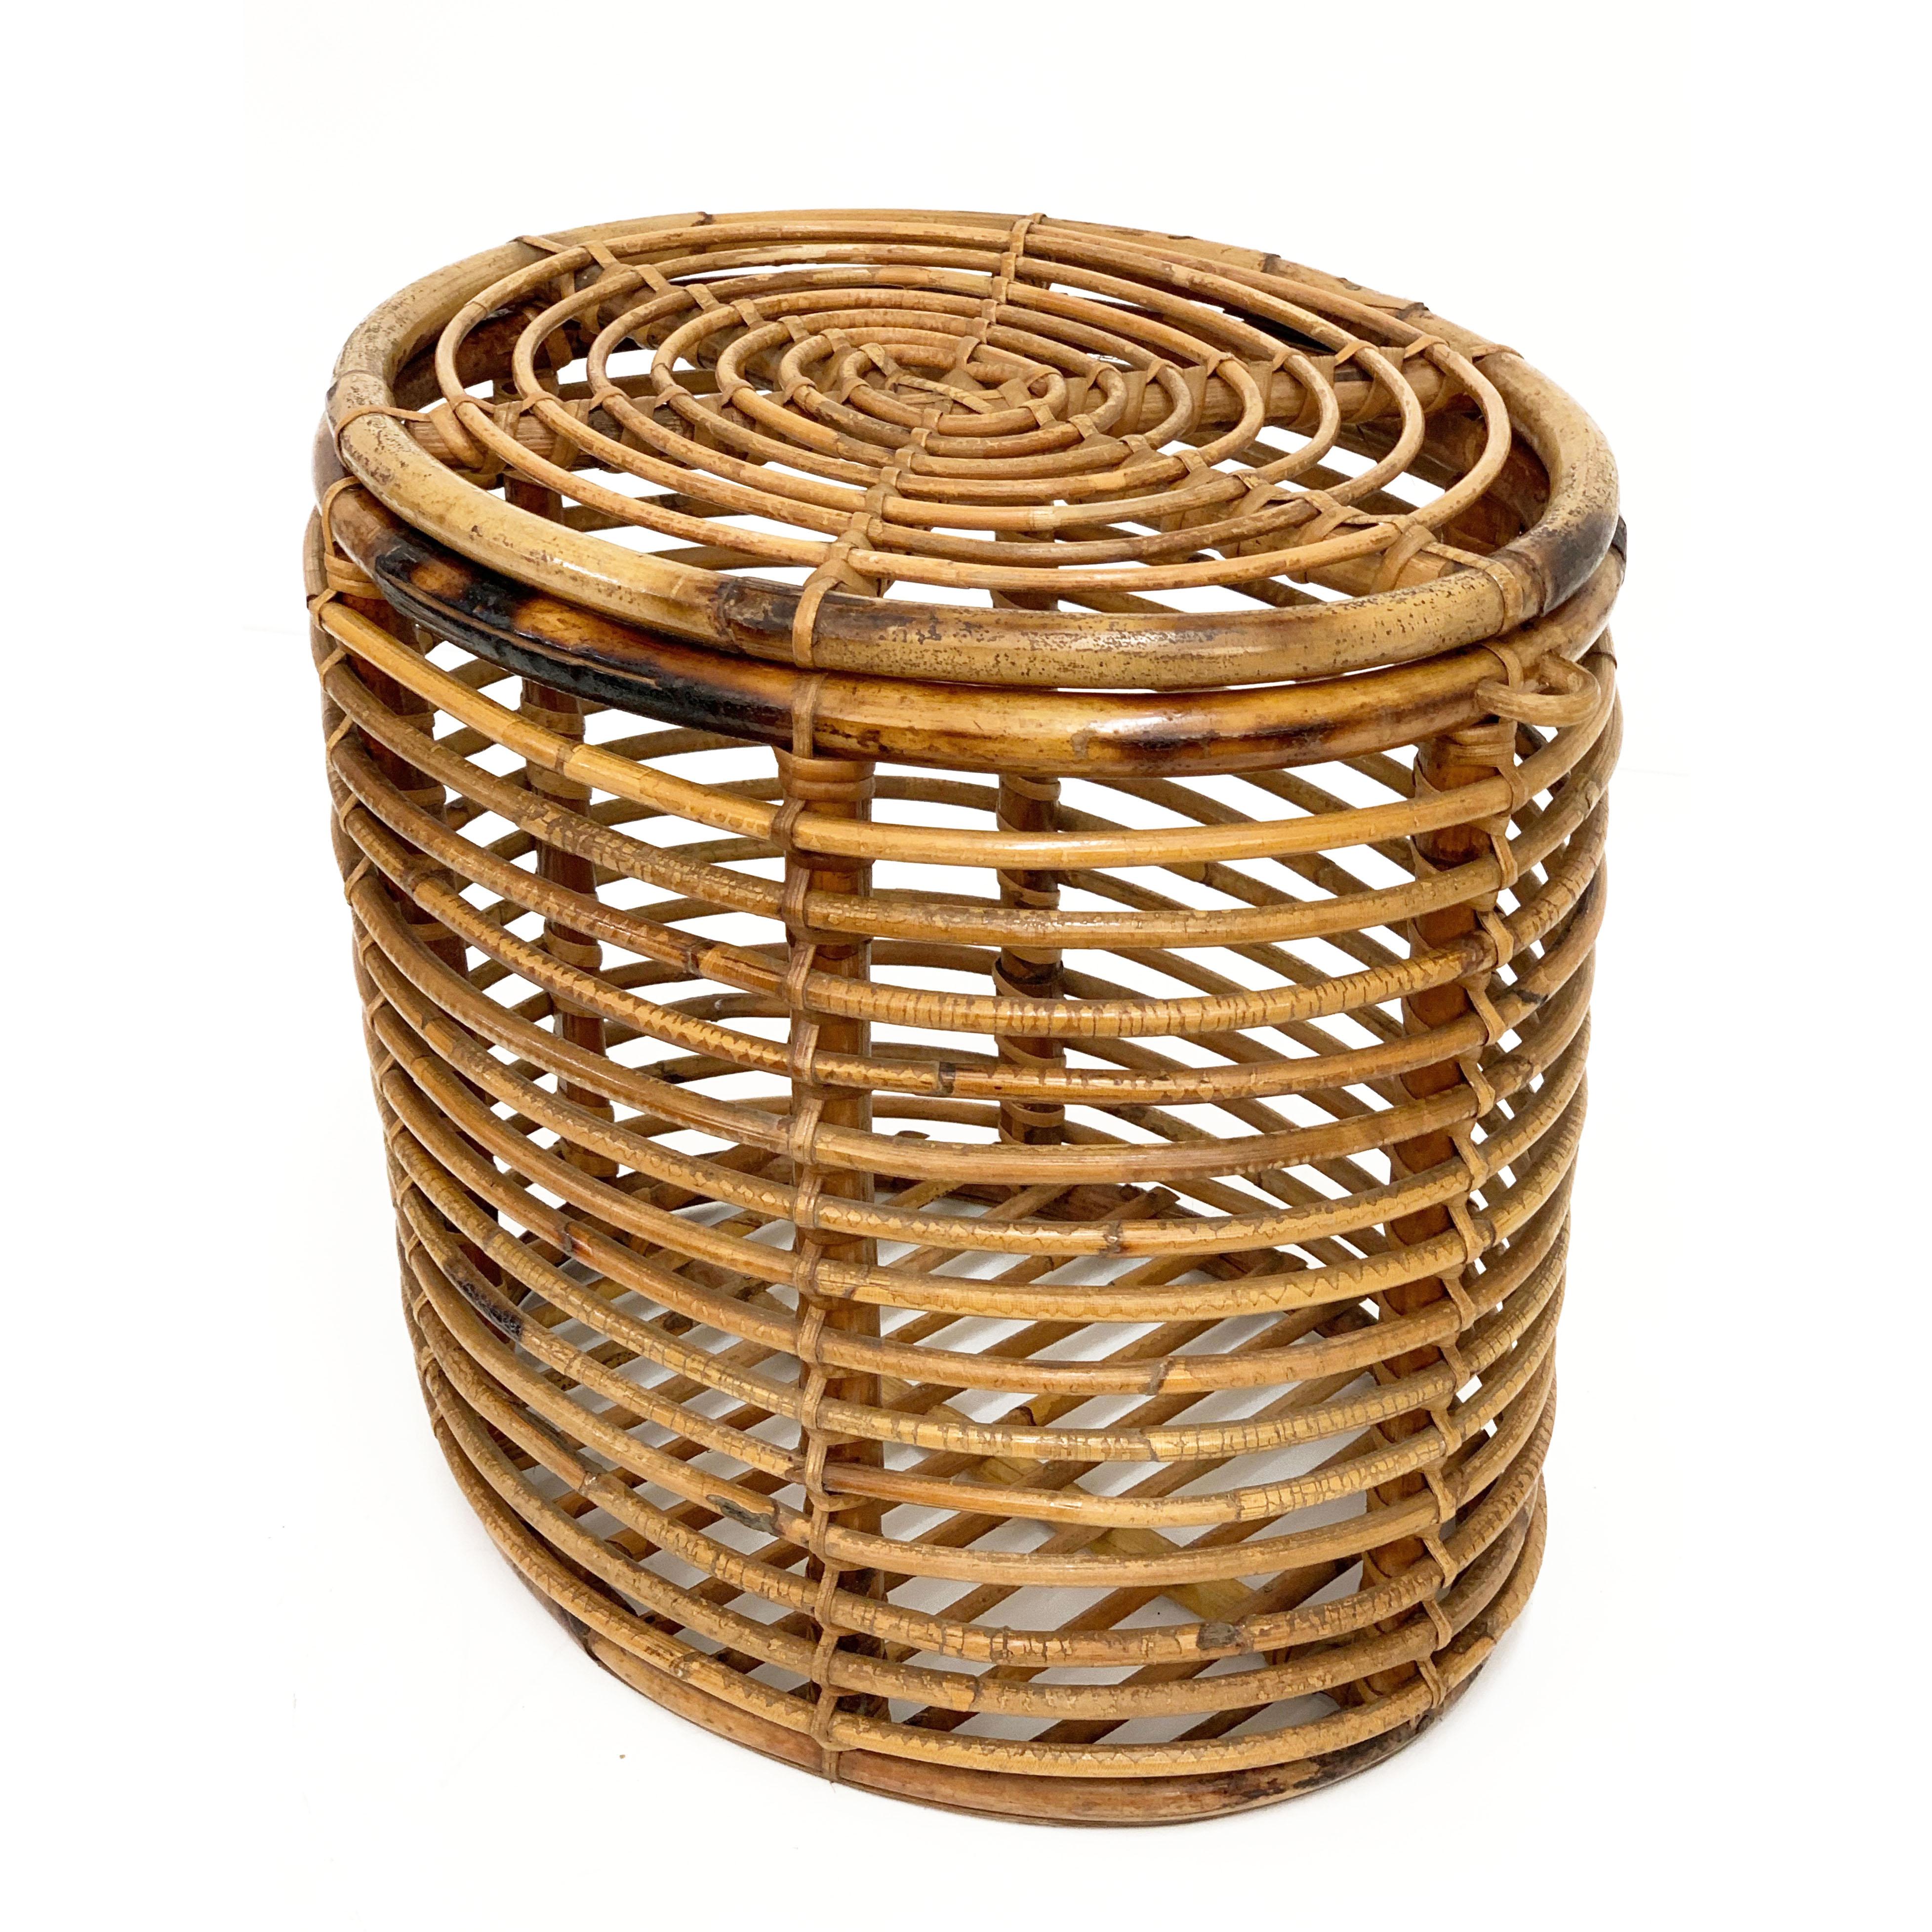 Midcentury French Riviera Bamboo and Rattan Oval Italian Basket, 1950s For Sale 6